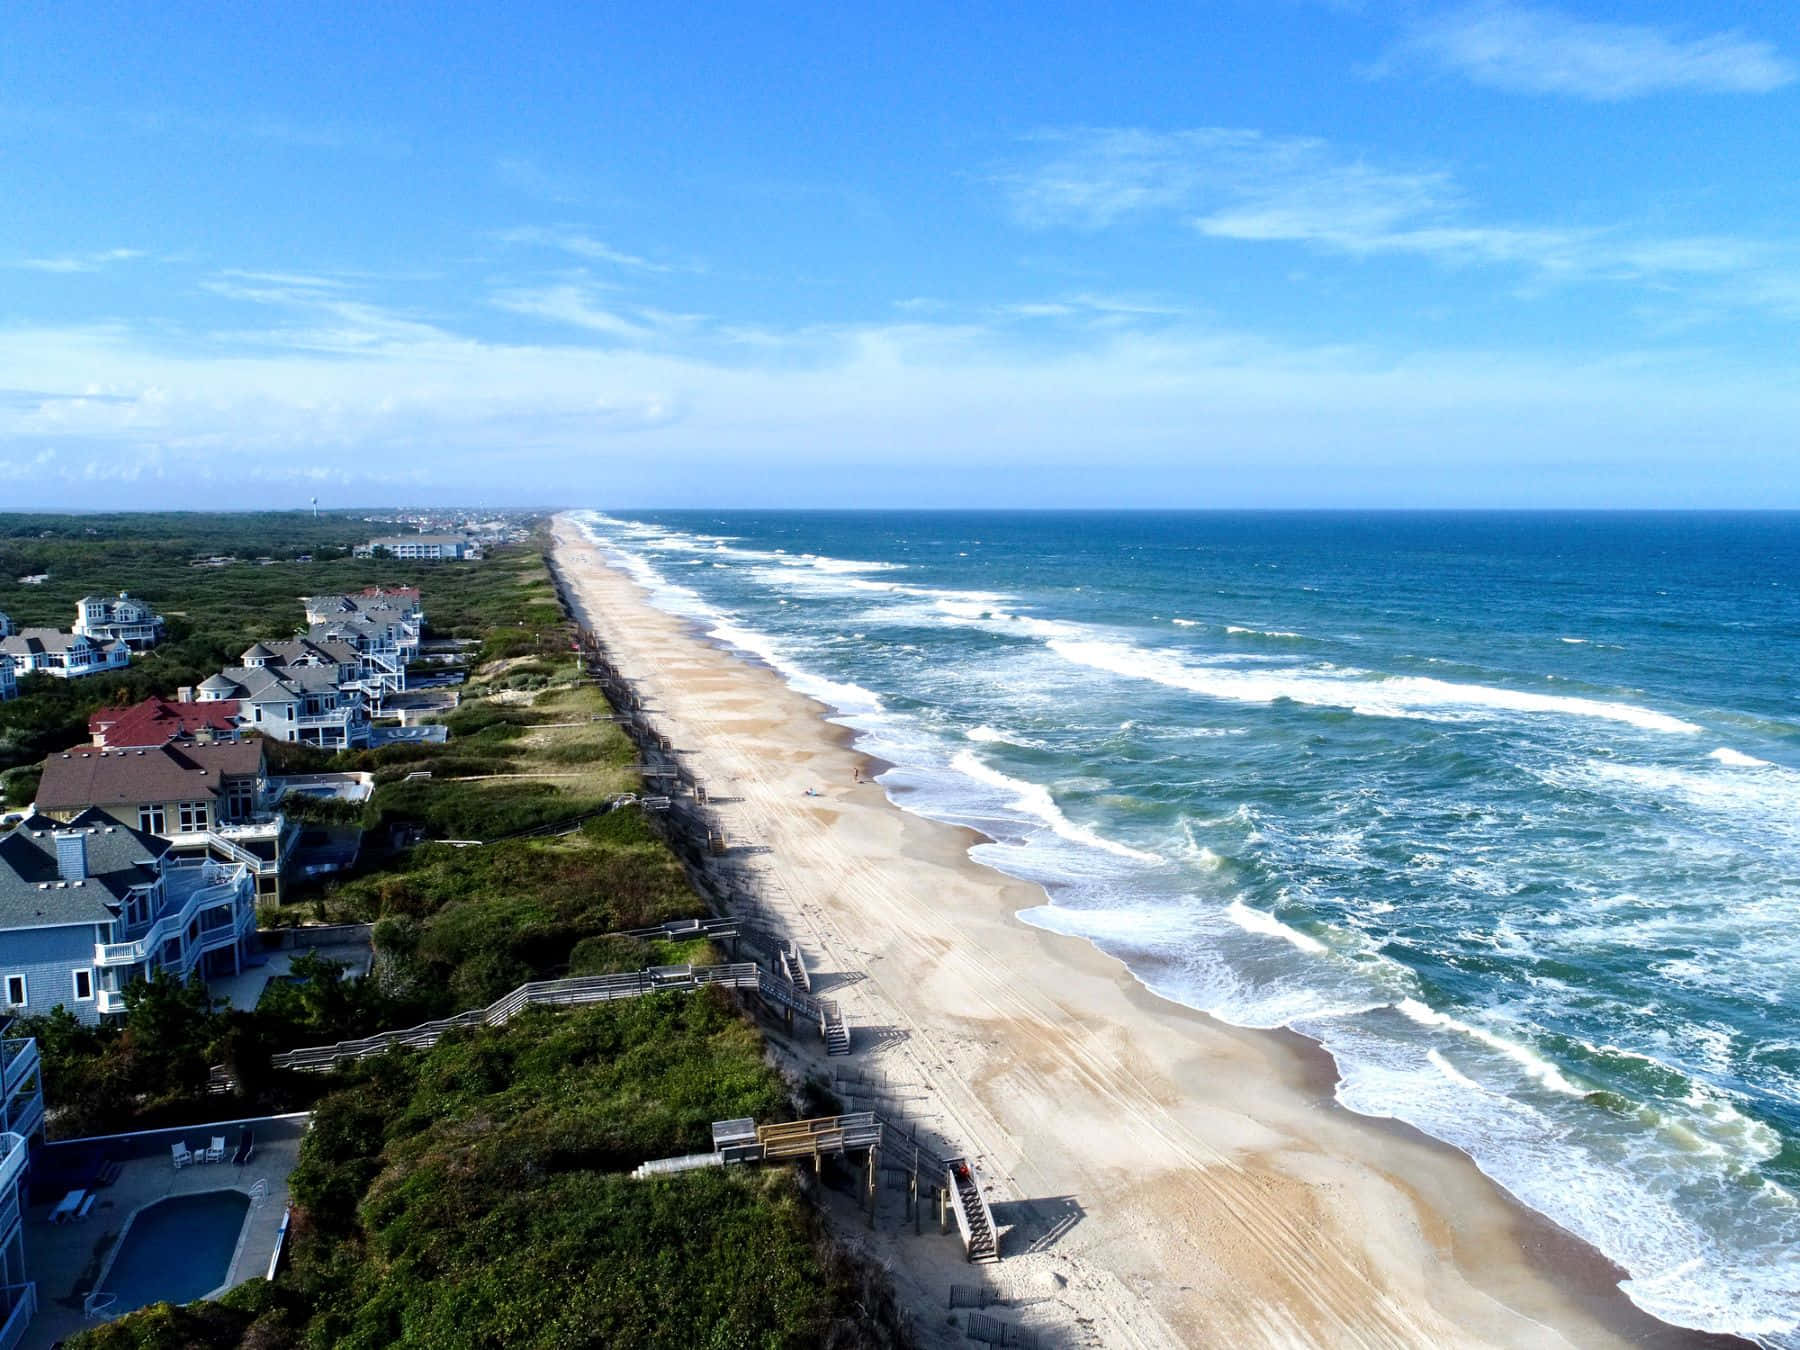 "Experience the Magic of the Outer Banks"